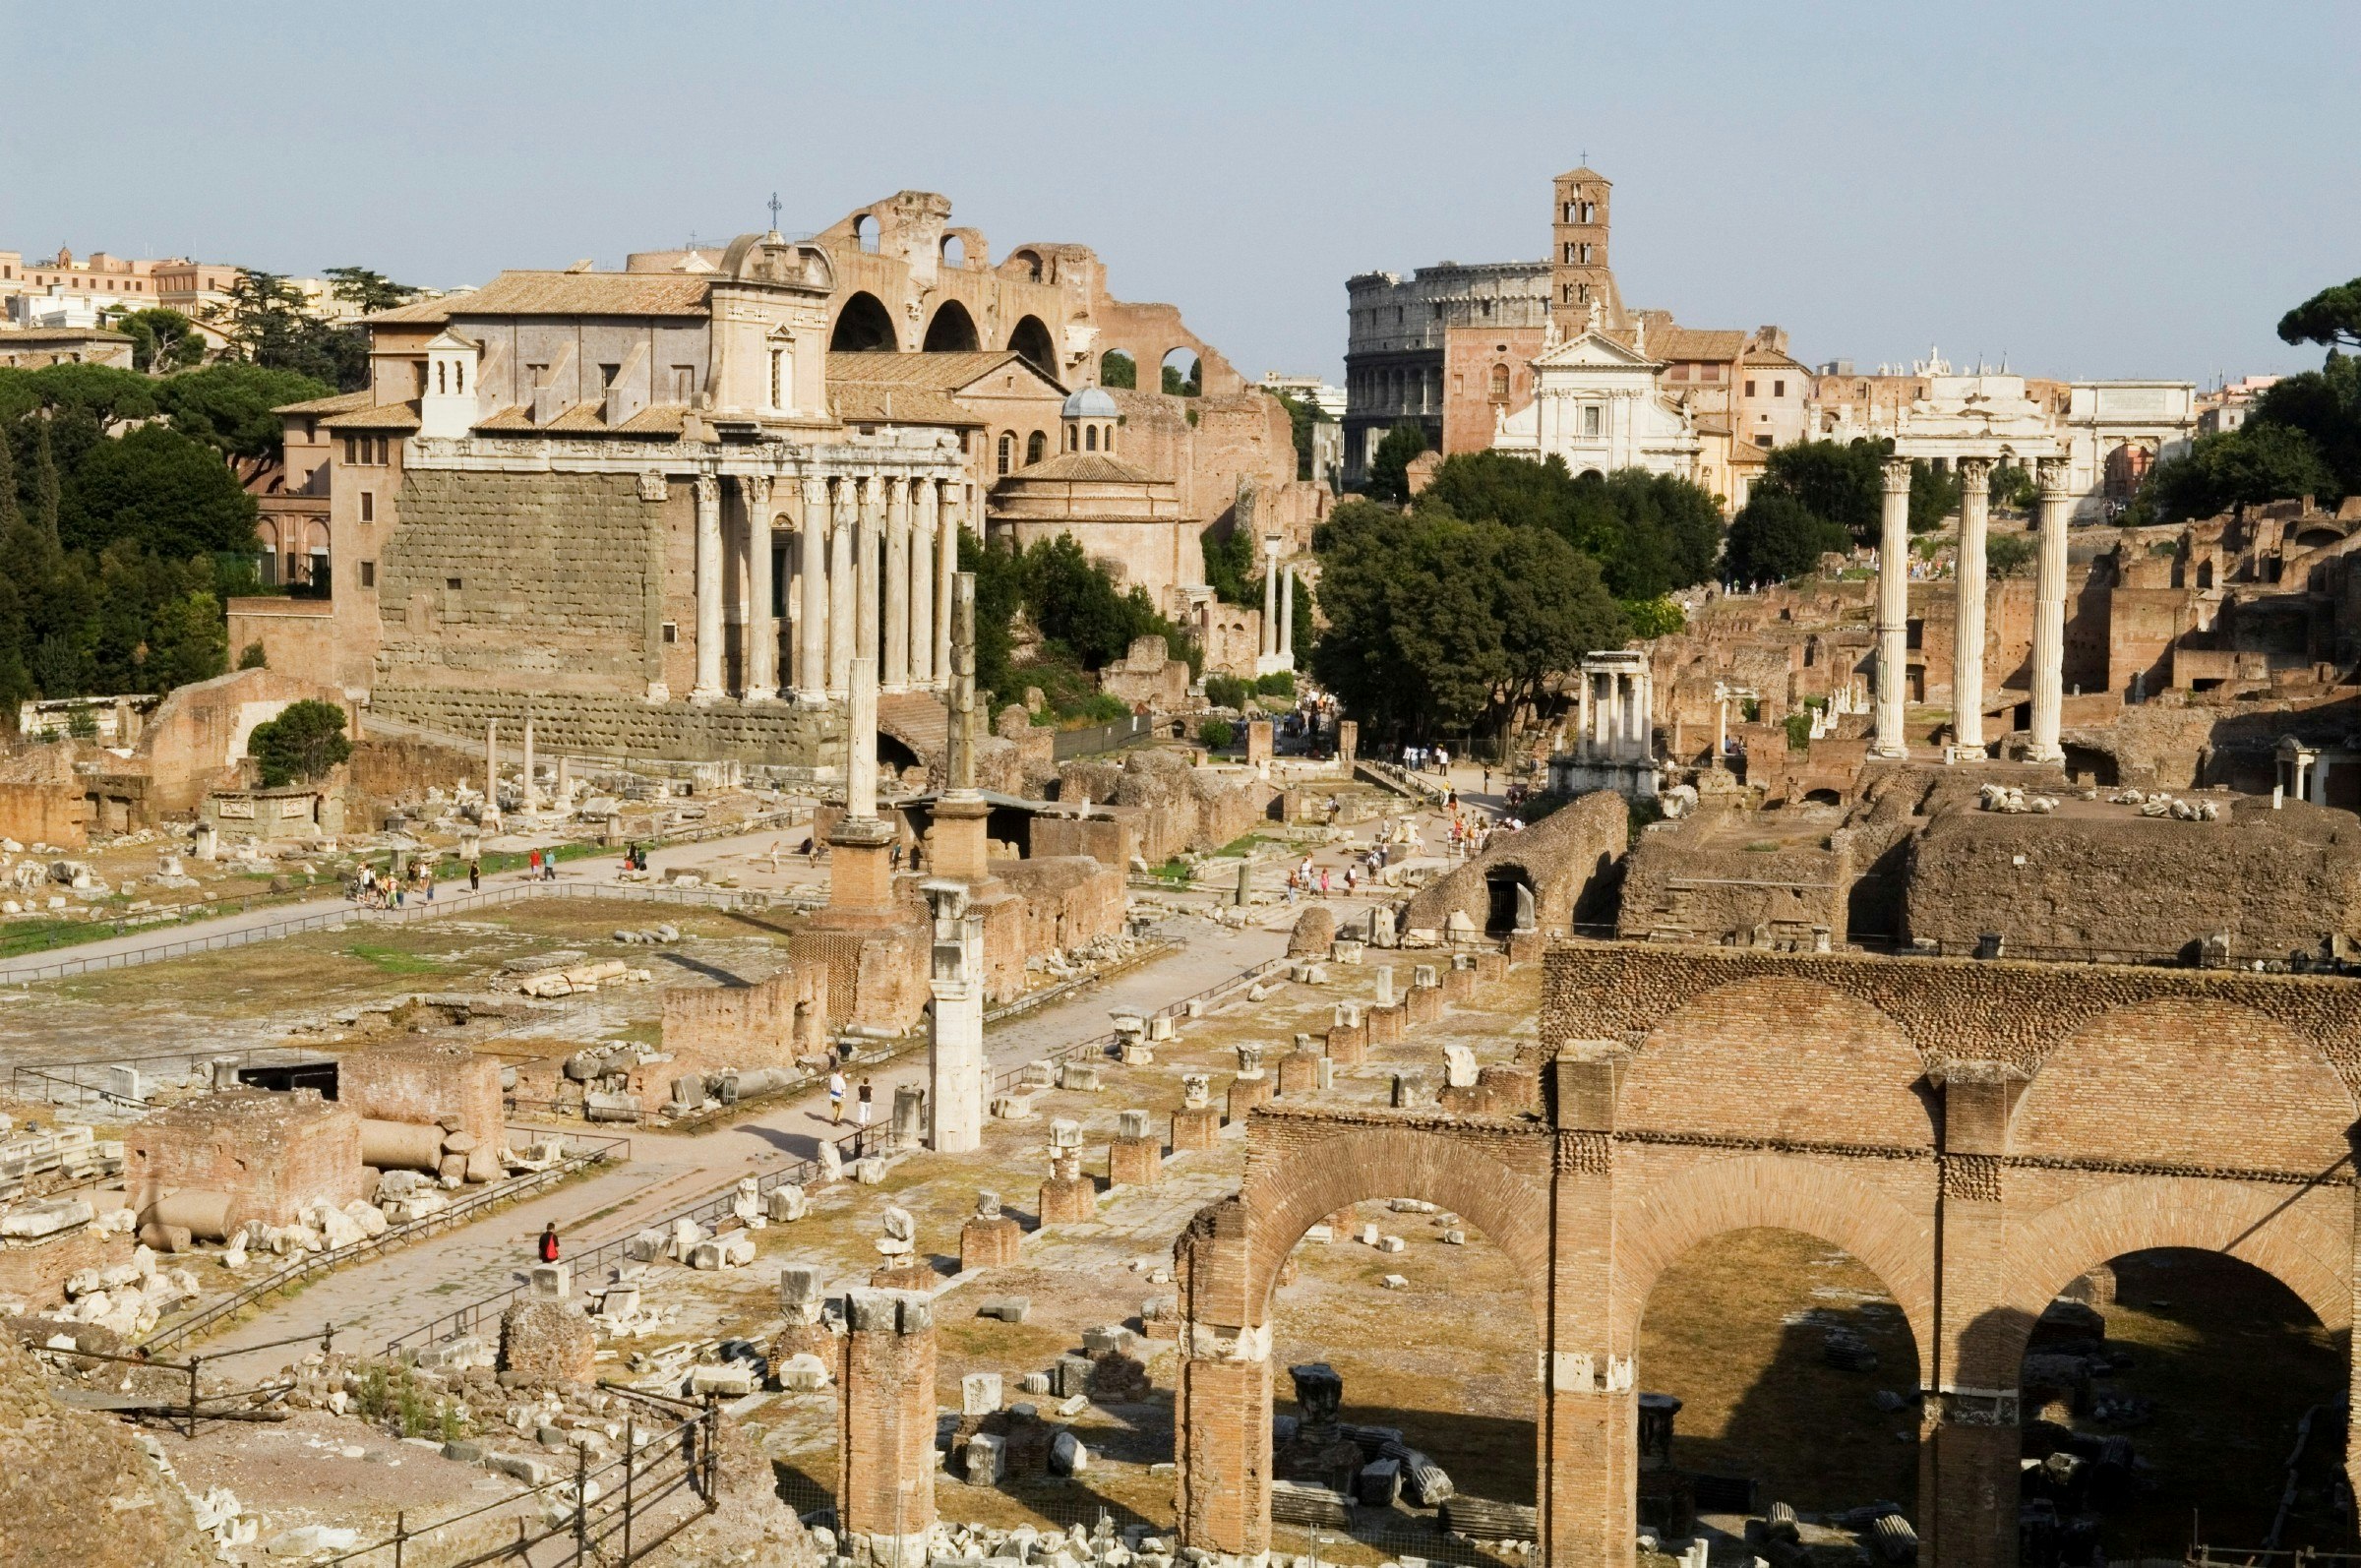 A view of the Roman Forum from Capitoline